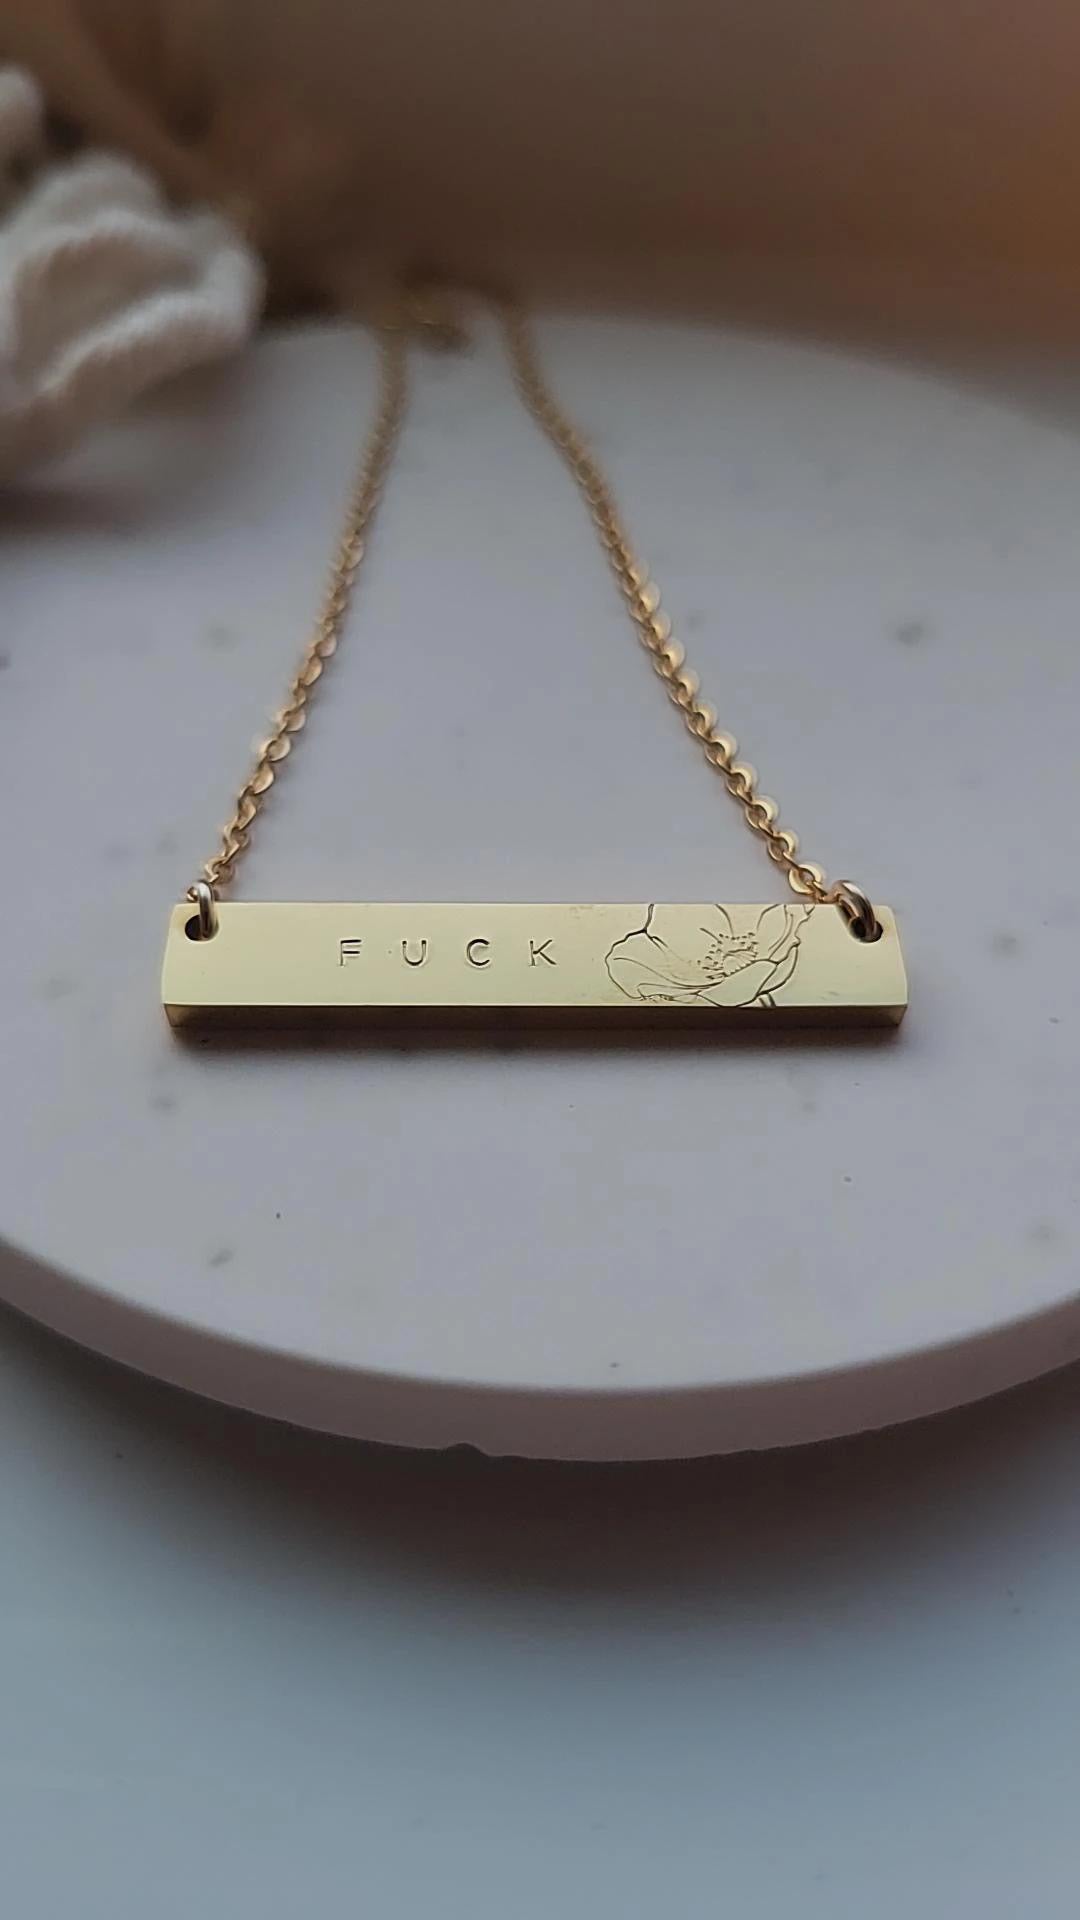 Fuck - Bar Necklace | Reign and Cash